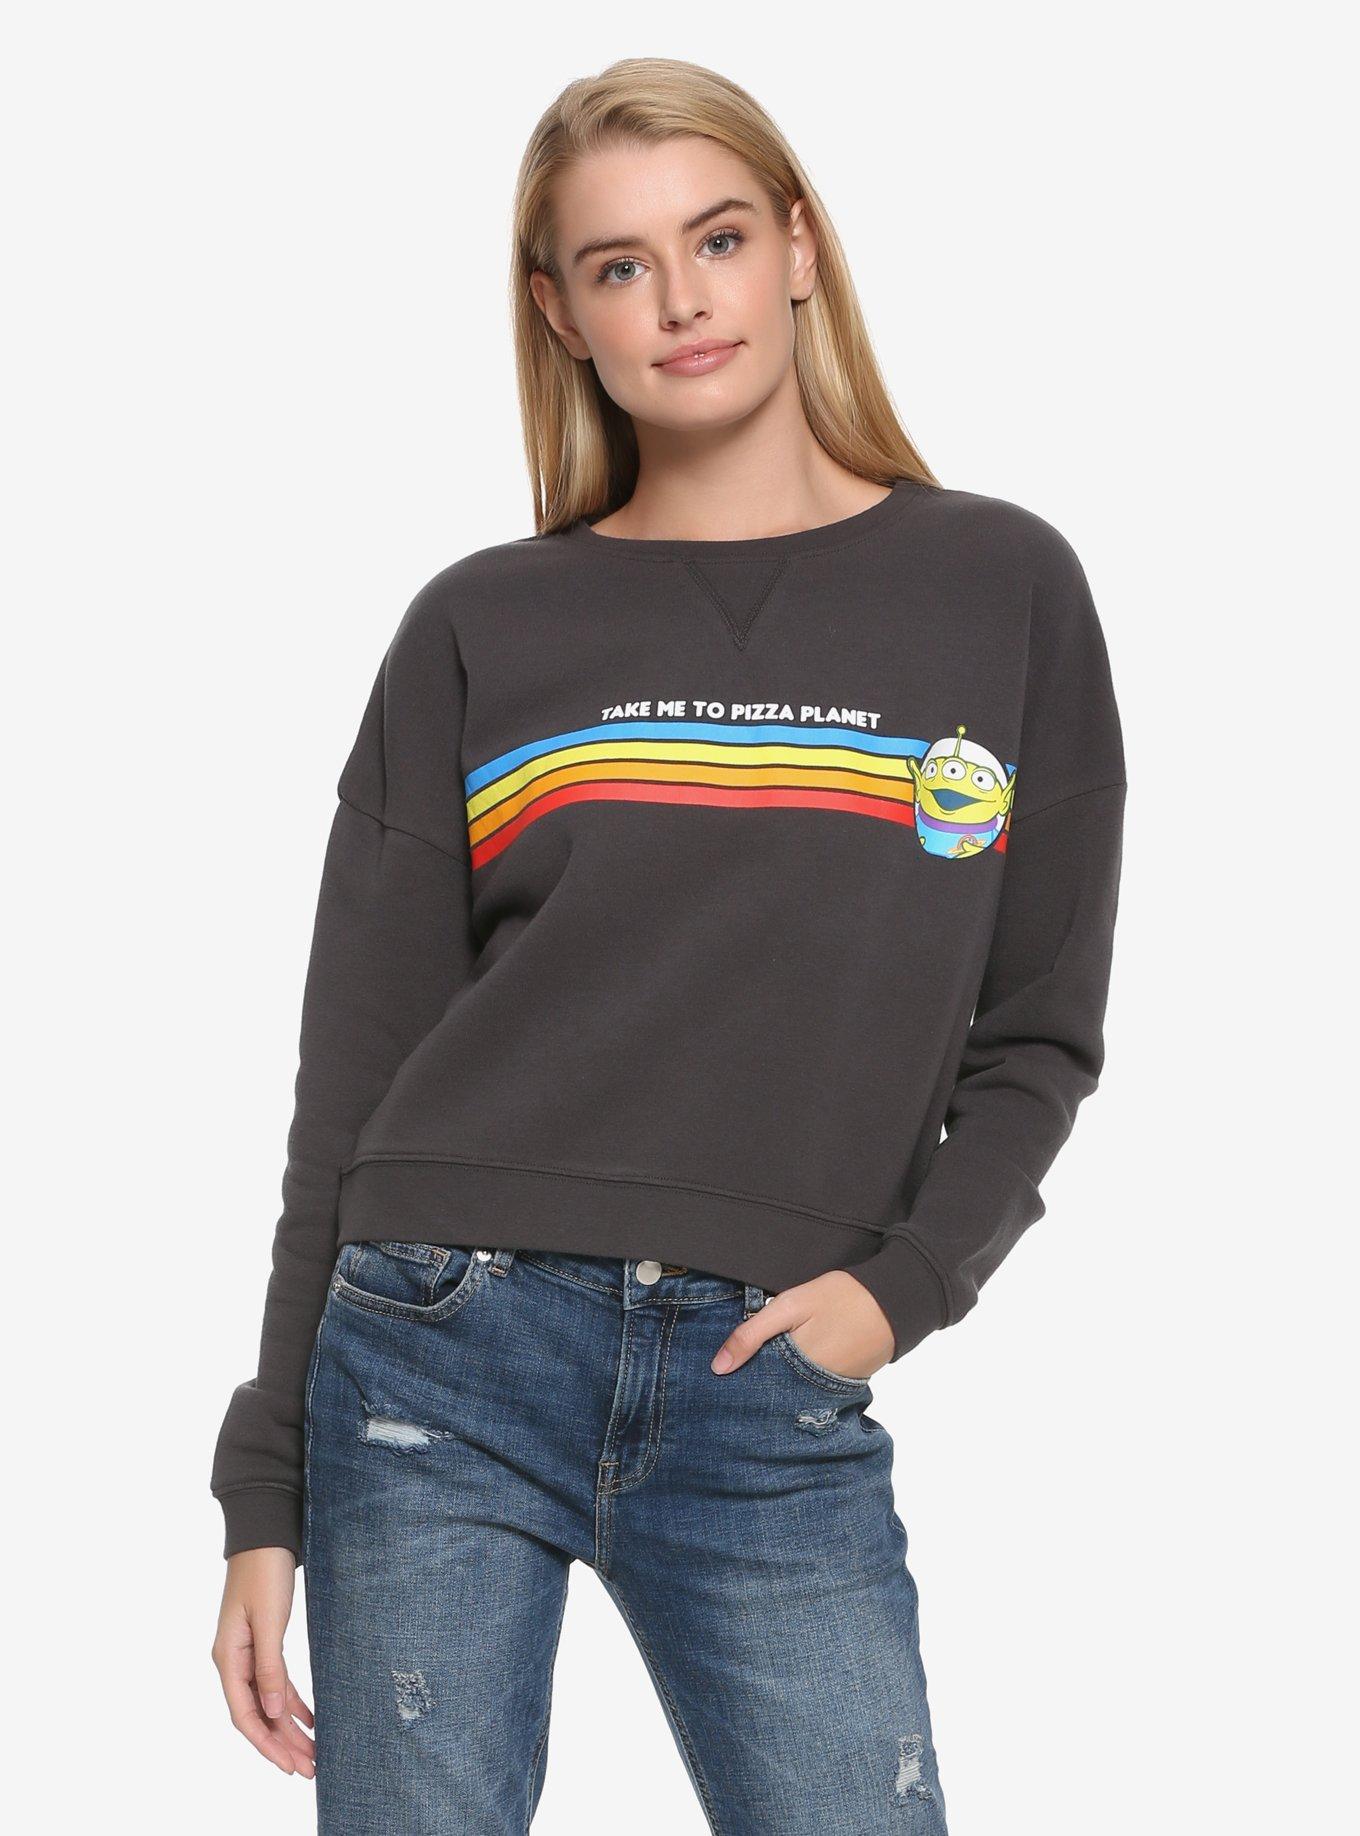 Disney Pixar Toy Story Pizza Planet Womens Skimmer Sweatershirt - BoxLunch Exclusive, GREY, hi-res